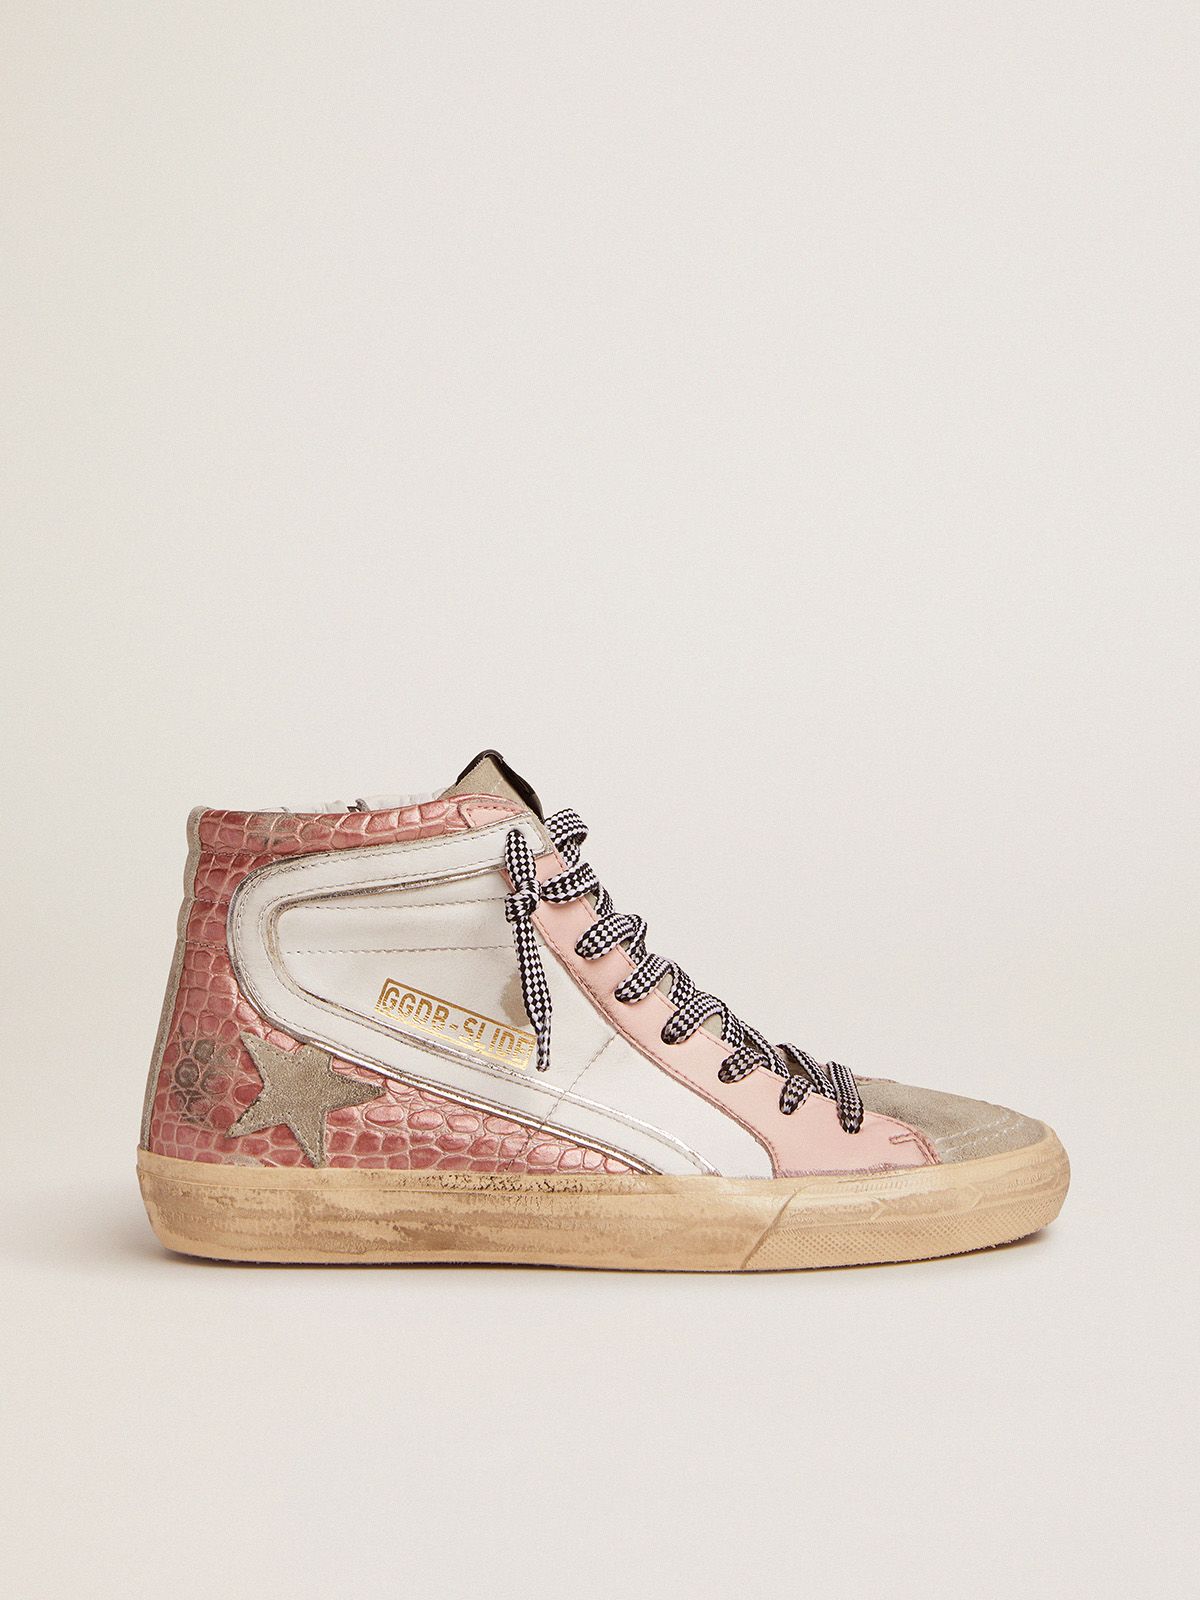 golden goose upper crocodile-print and leather Slide pink with sneakers white